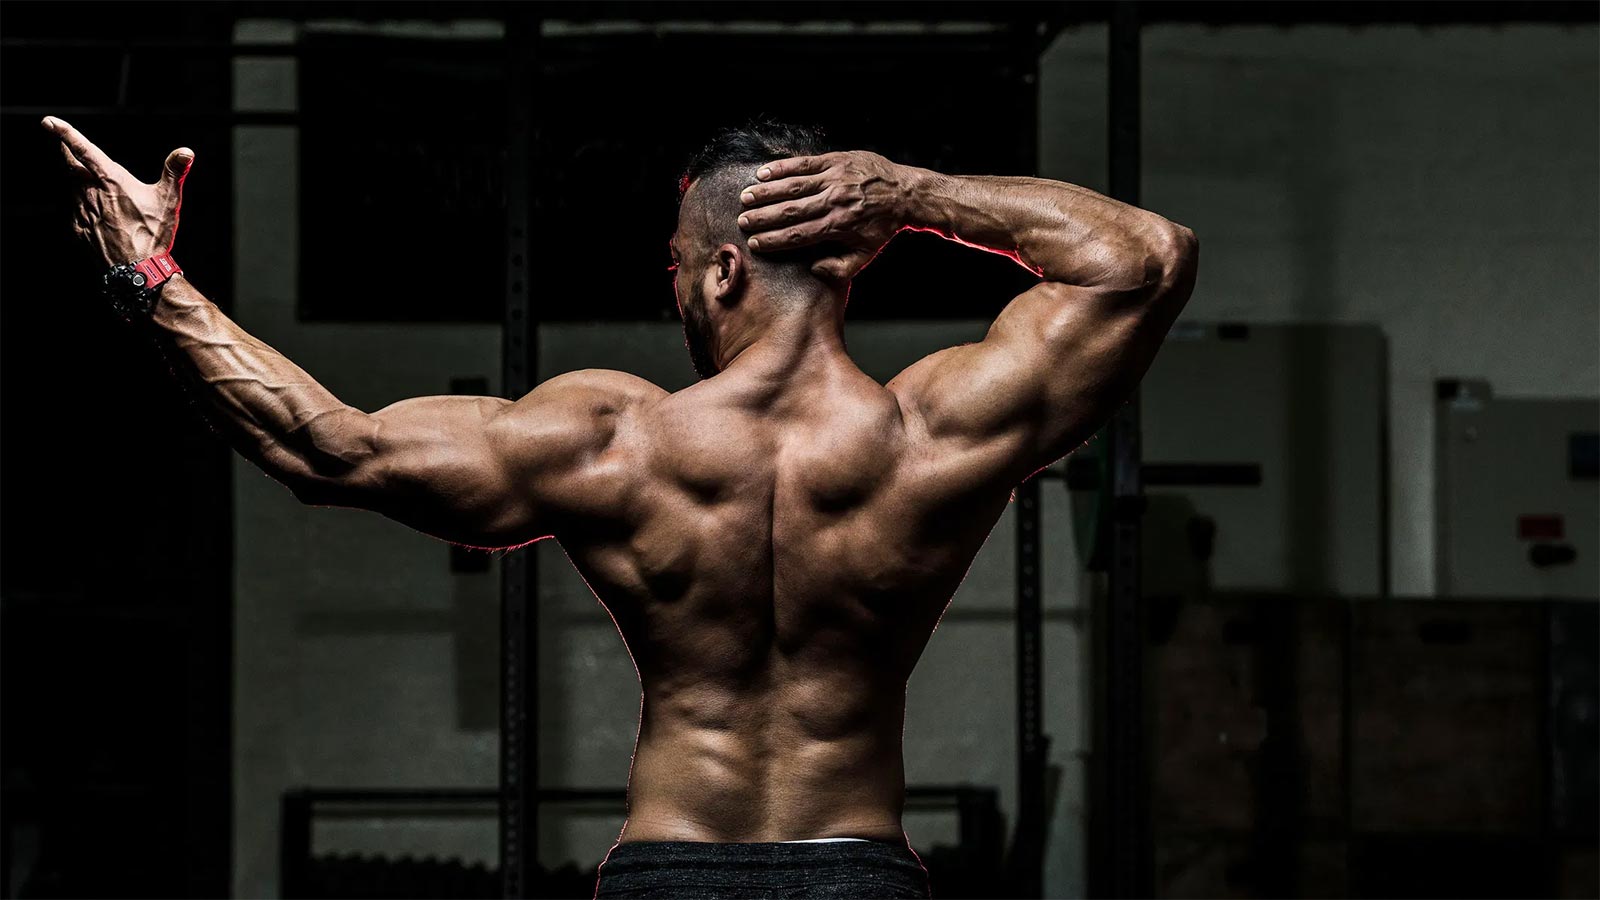 Top 5 back exercises for an amazing back workout